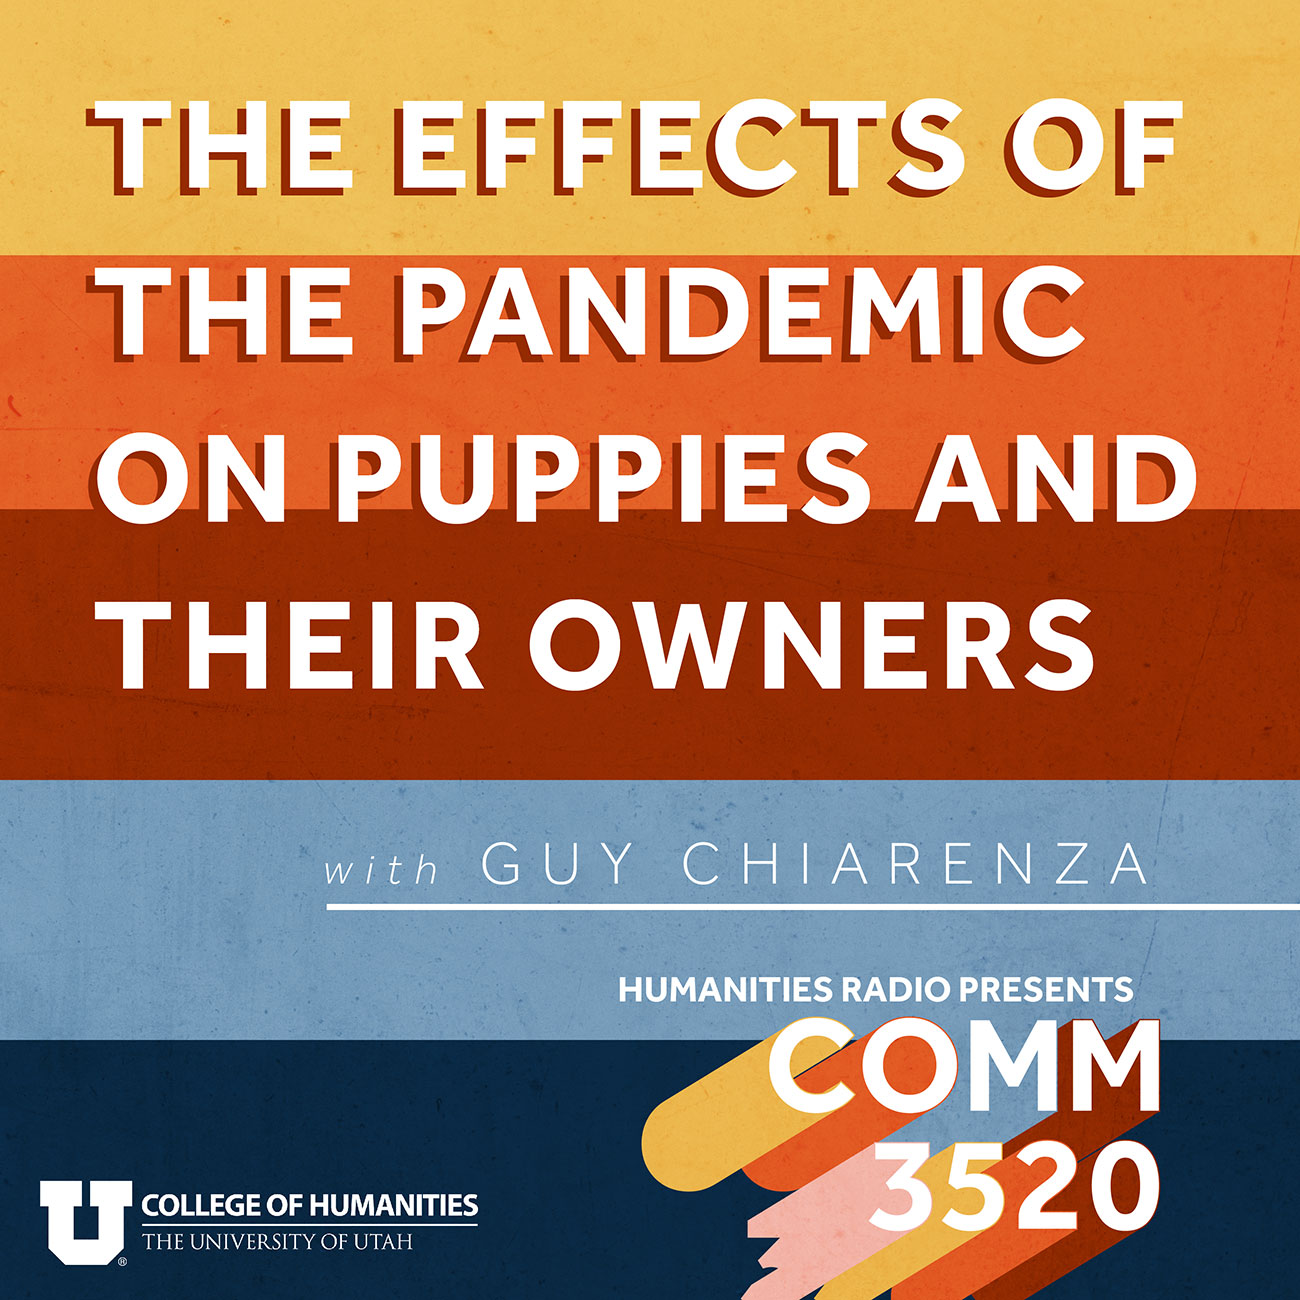 The Effects of the Pandemic on Puppies and Their Owners